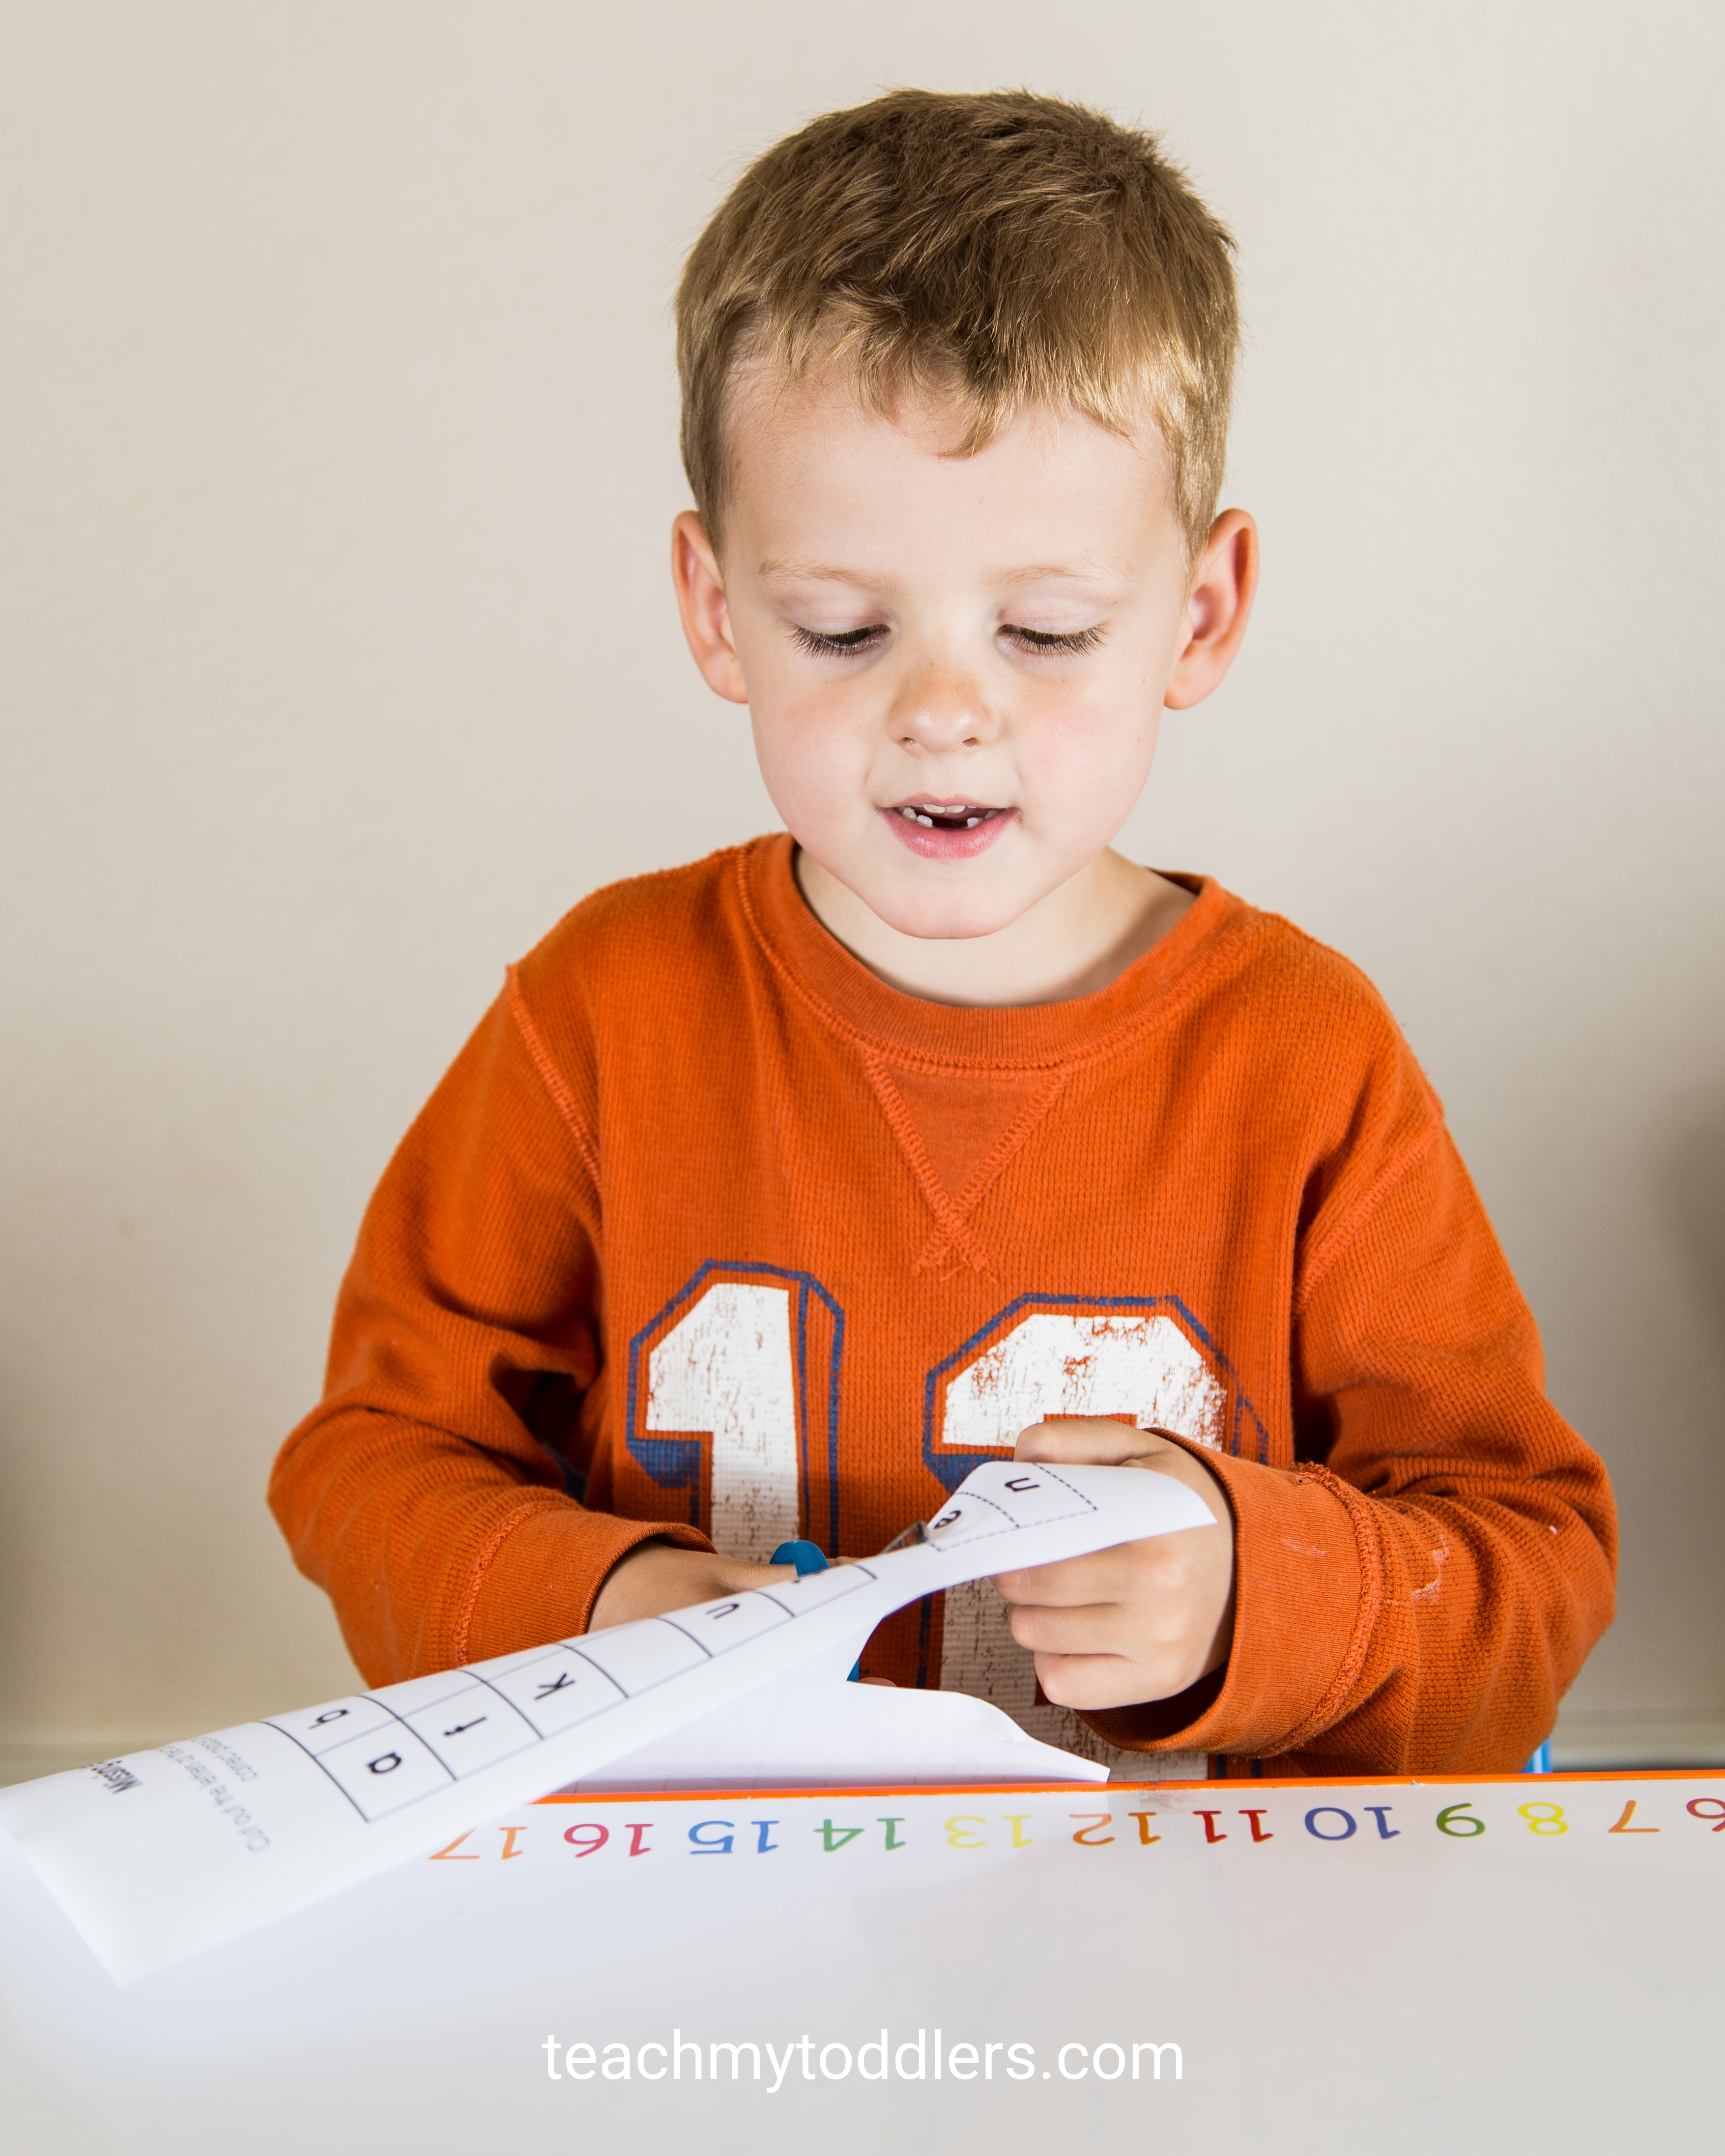 Learn how to use this missing letters activity to teach your toddlers letters